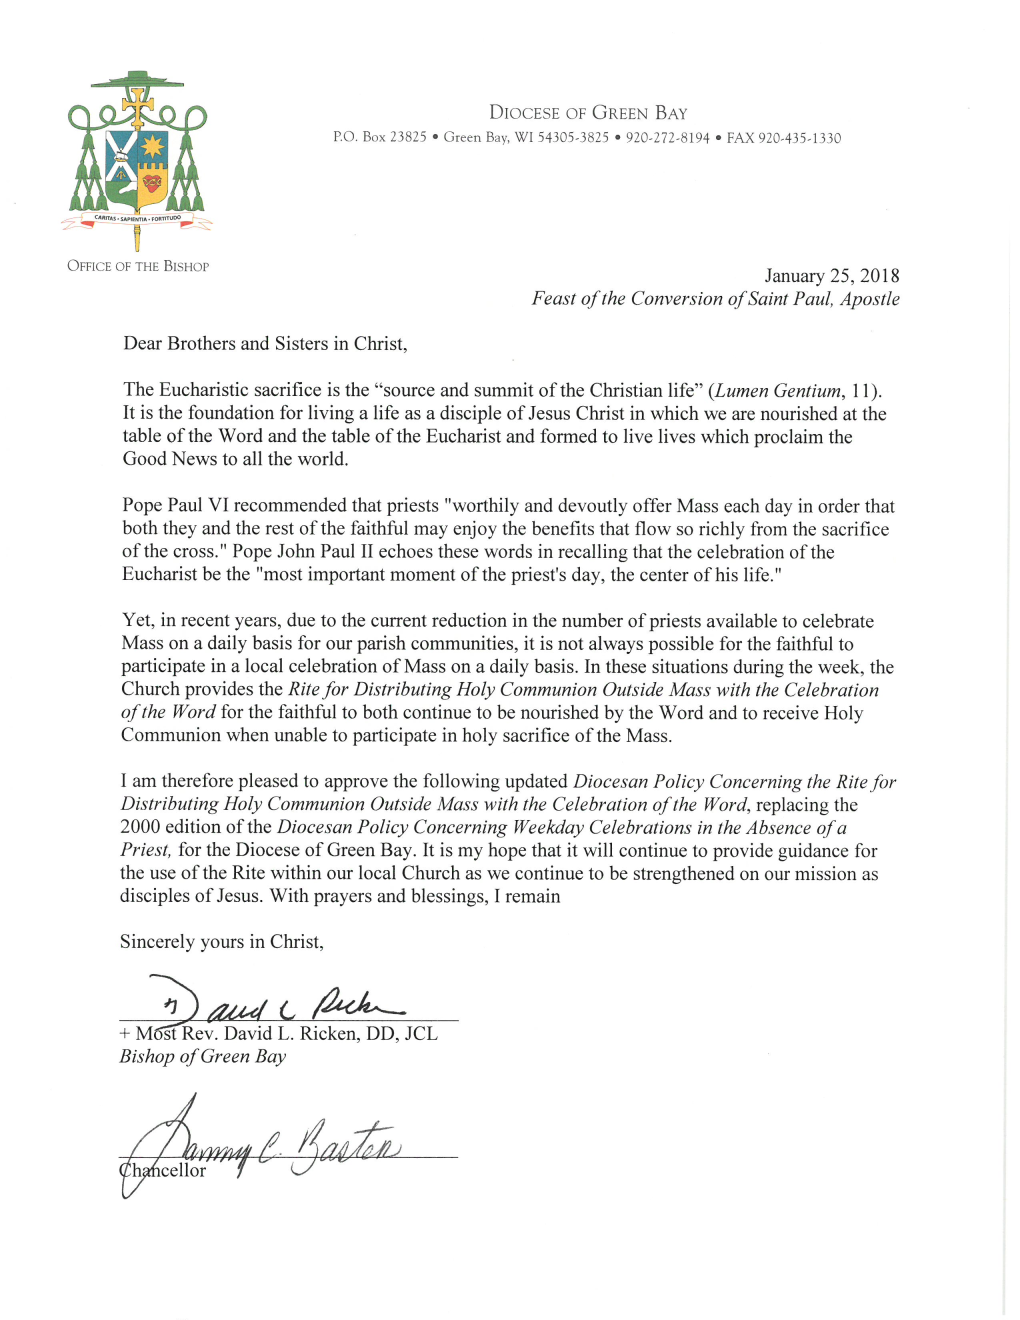 Diocesan Policy Concerning the Rite for Distributing Holy Communion Outside Mass with the Celebration of the Word